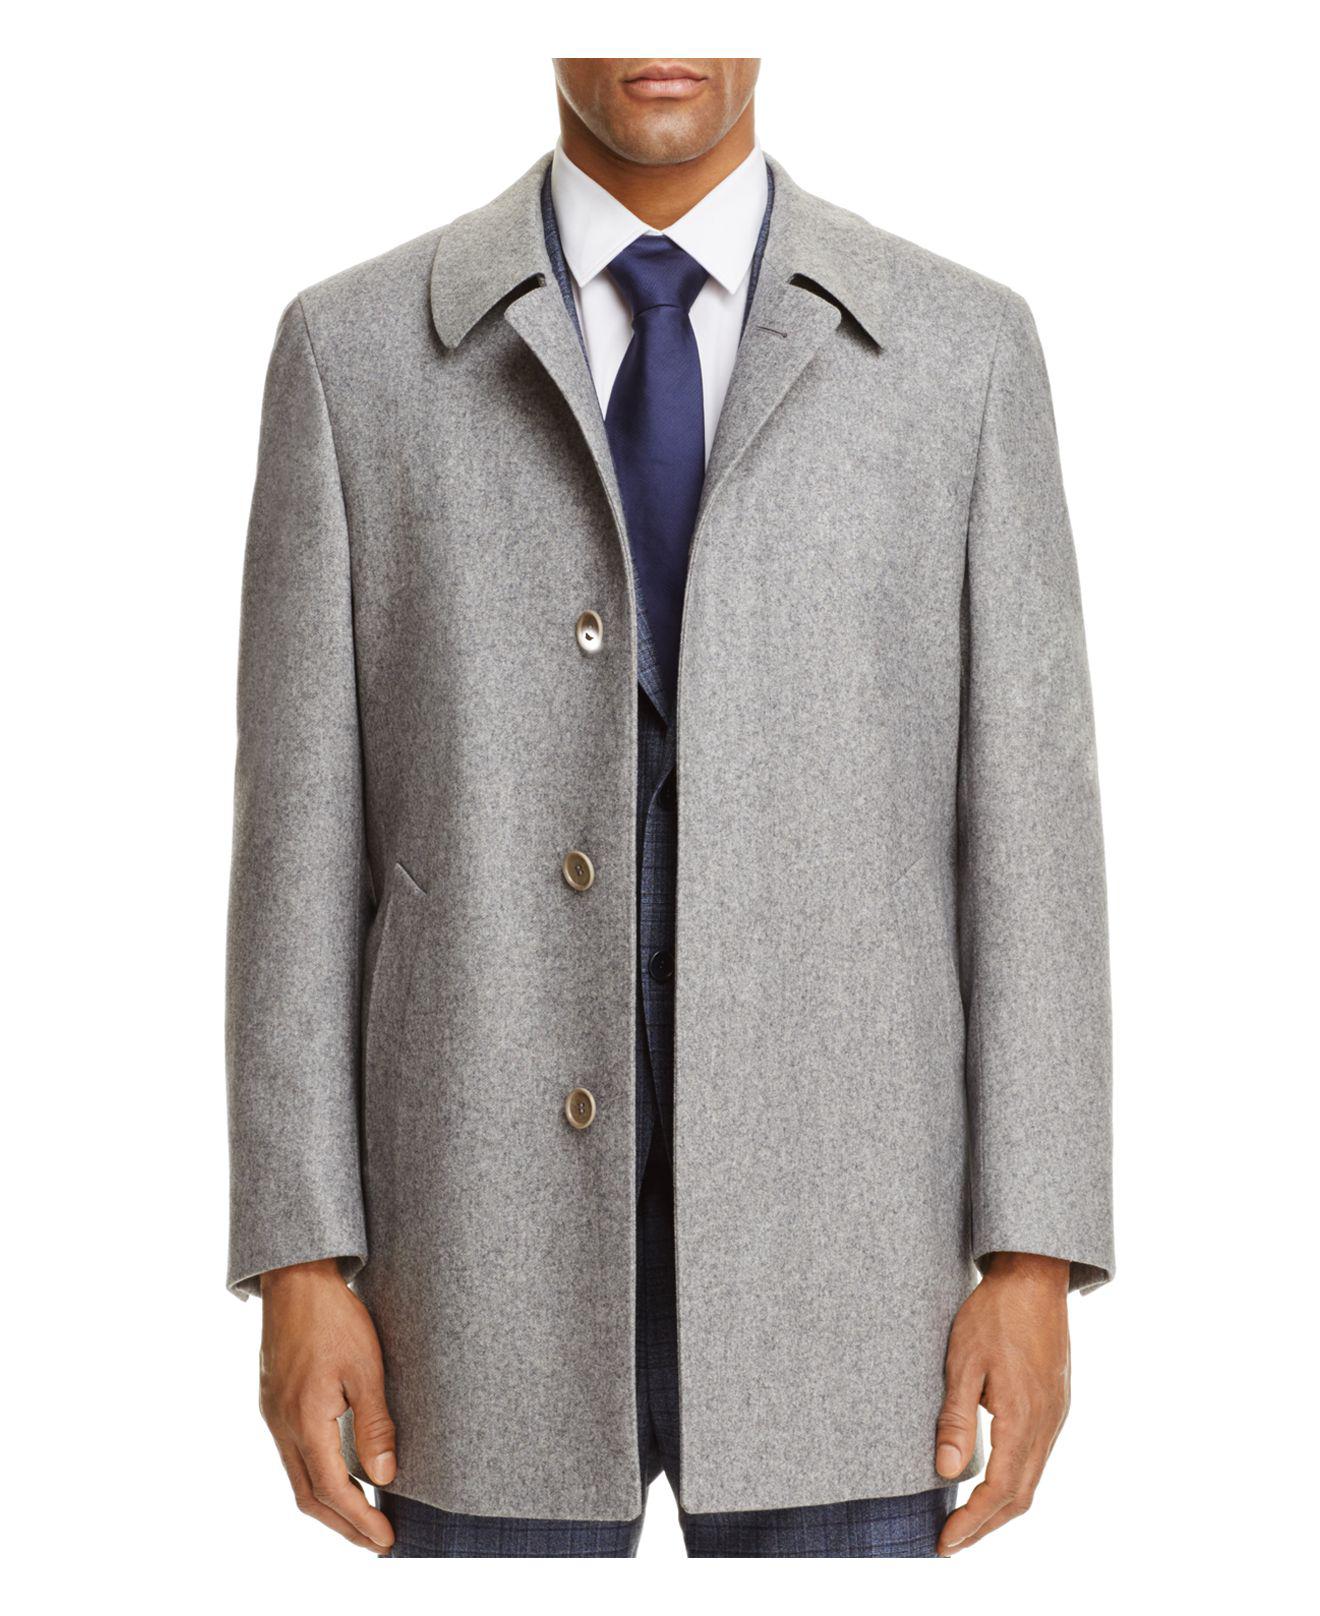 Lyst - Canali Car Coat in Gray for Men